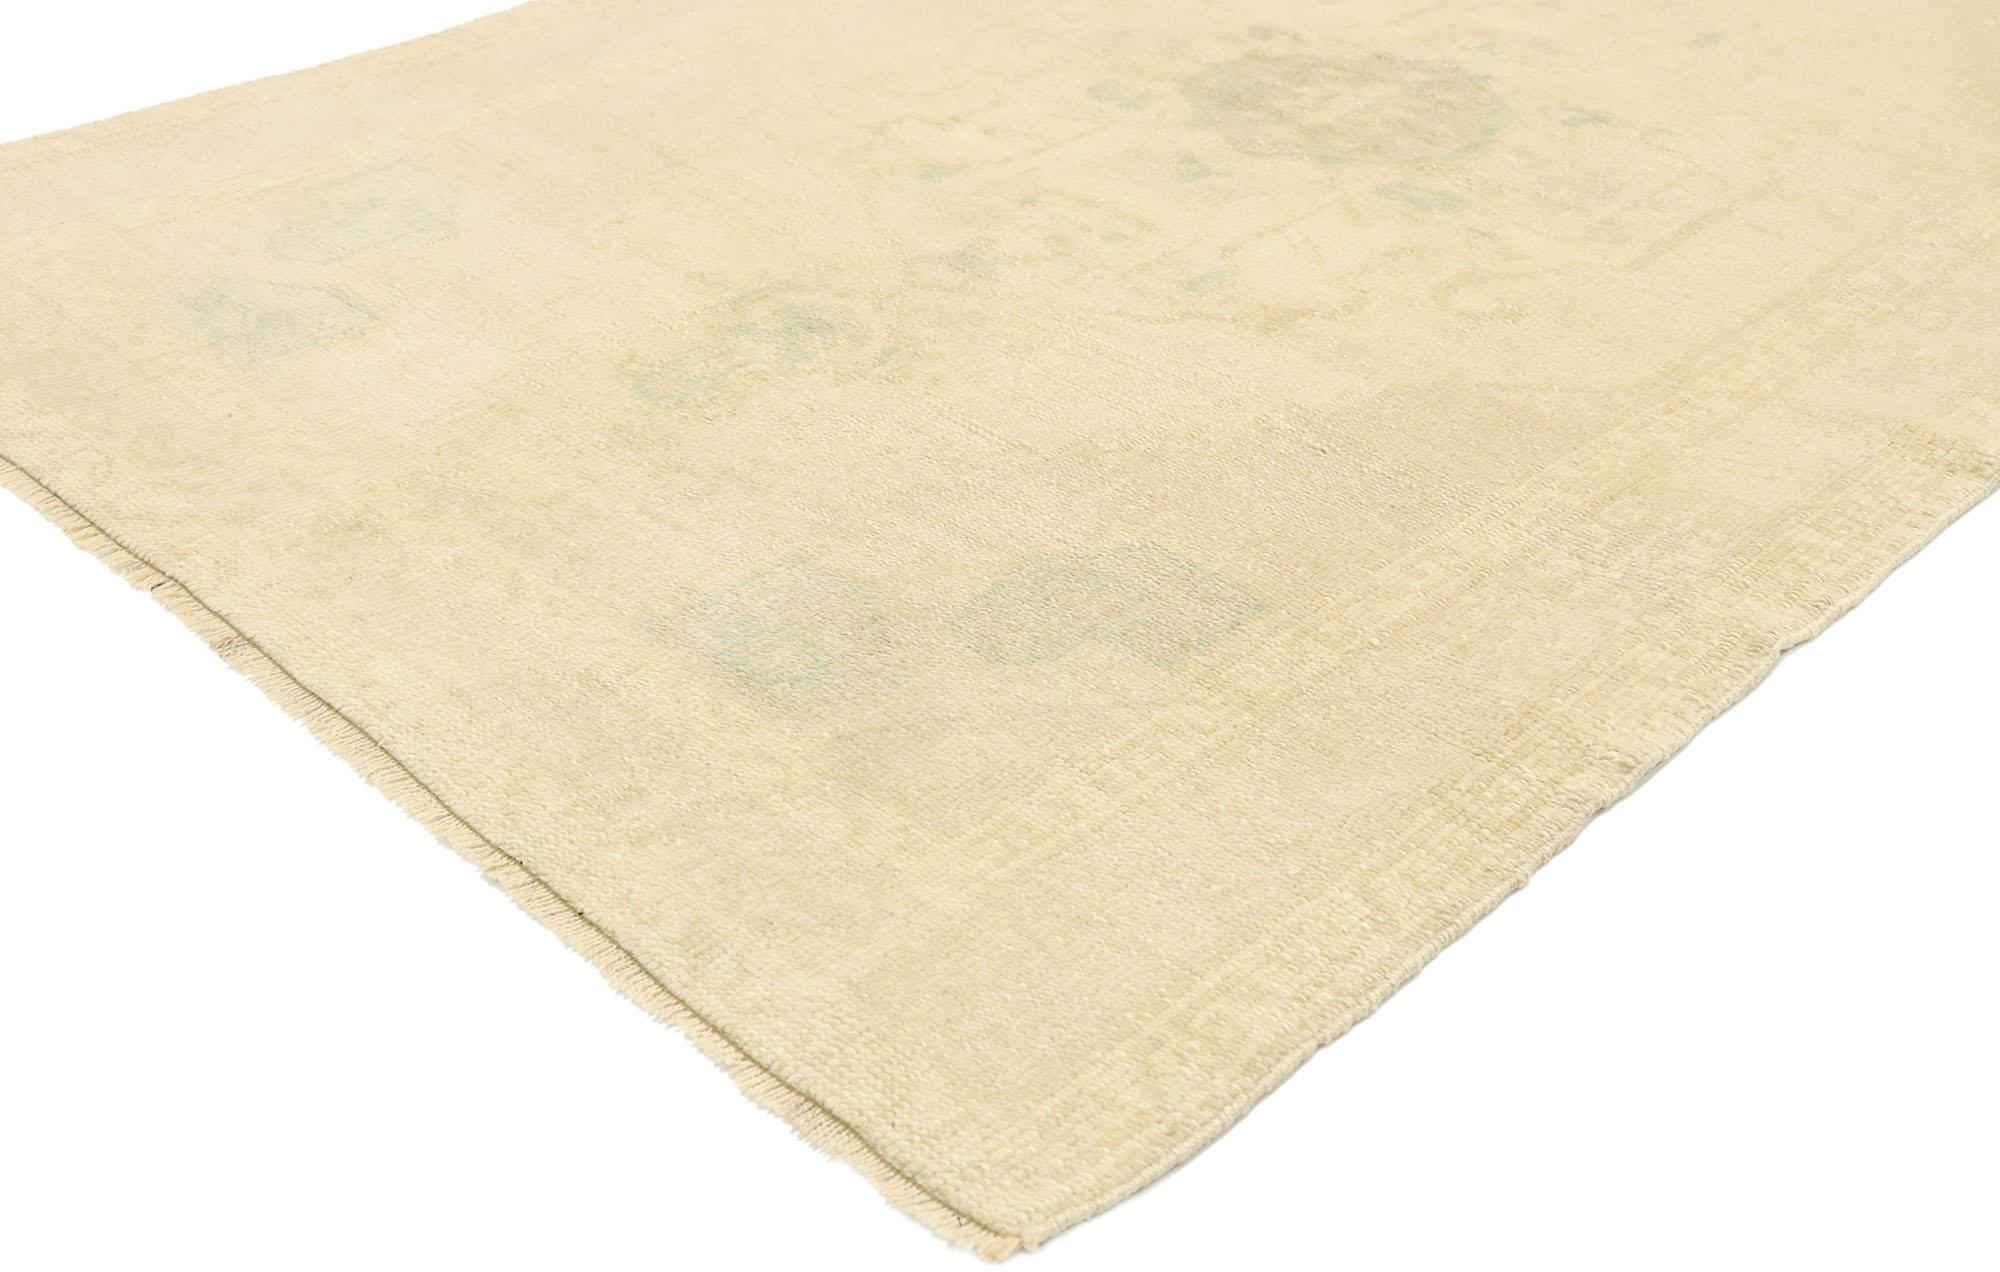 52971, vintage Turkish Oushak rug with Monochromatic Minimalist International style. Soft, bespoke vibes and simplicity meet effortless beauty in this hand knotted wool vintage Turkish Oushak rug. The antique washed field displays a daintily woven